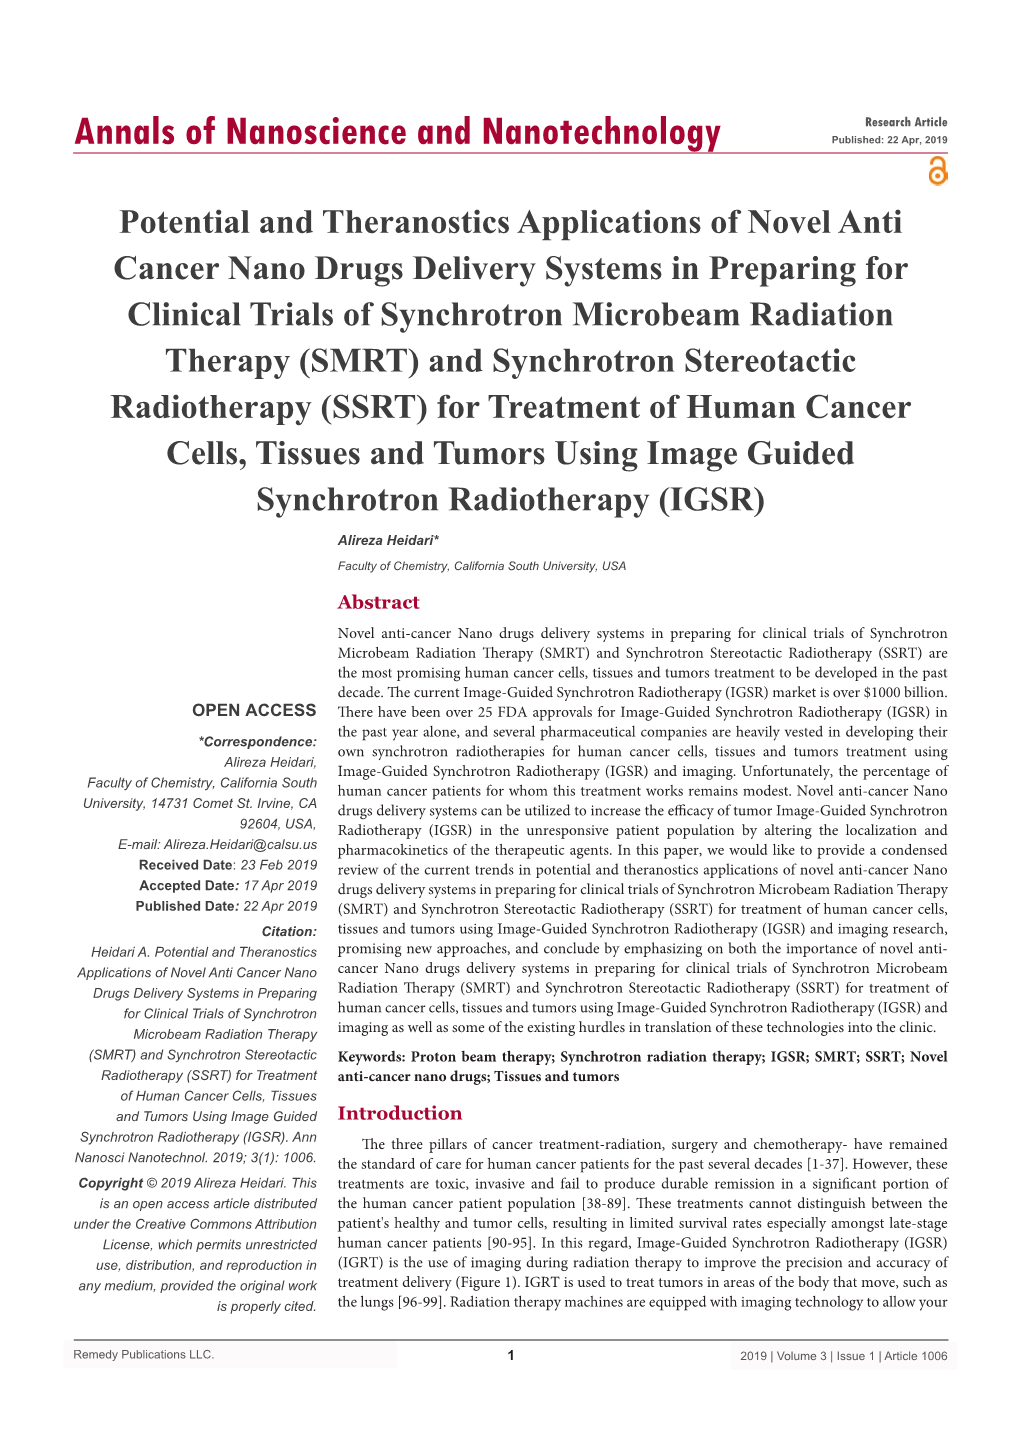 Potential and Theranostics Applications of Novel Anti Cancer